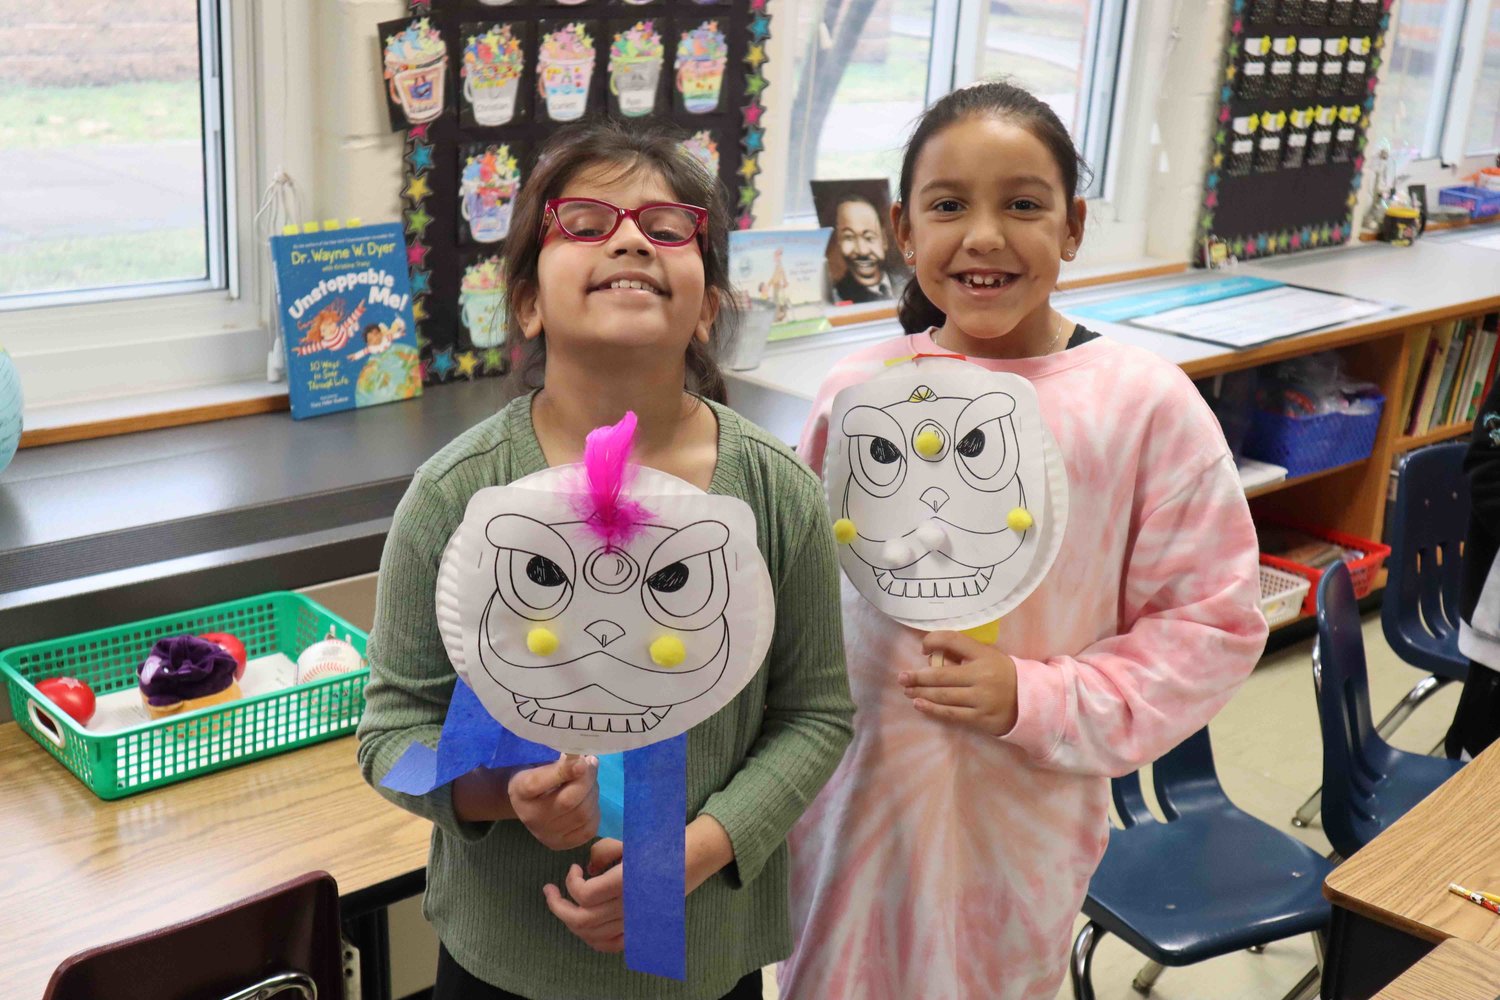 From left, Anniyah Adeel and Gabriella Ospina Caicedo celebrated the Lunar New Year at Shaw Avenue Elementary School.